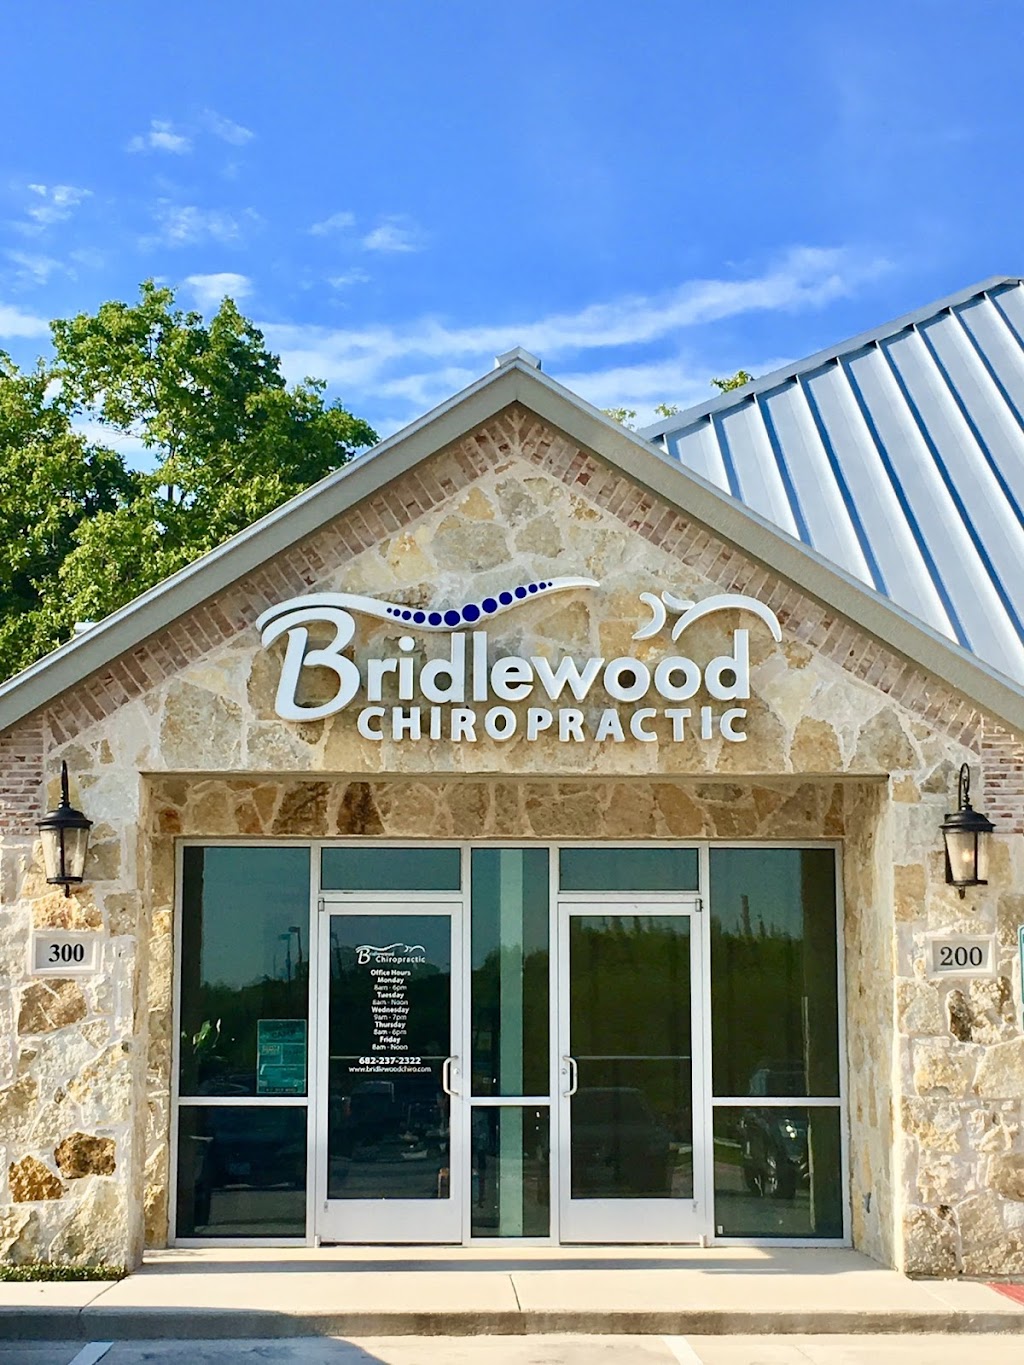 Bridlewood Chiropractic | 100 Country View Dr Suite: 300, Roanoke, TX 76262 | Phone: (682) 237-2322